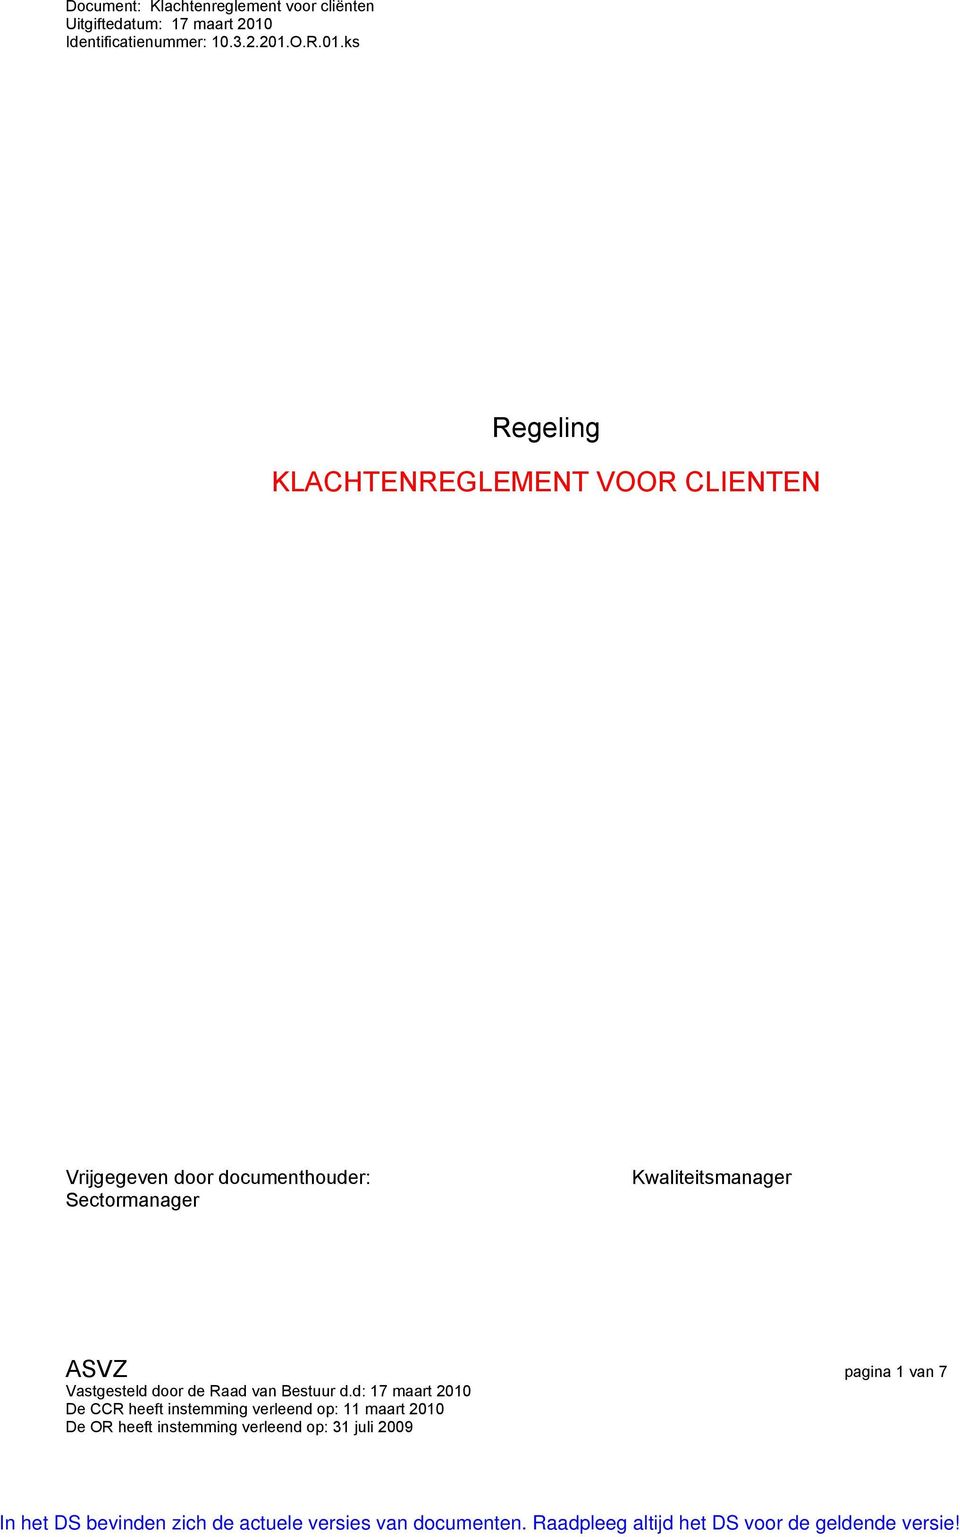 documenthouder: Sectormanager